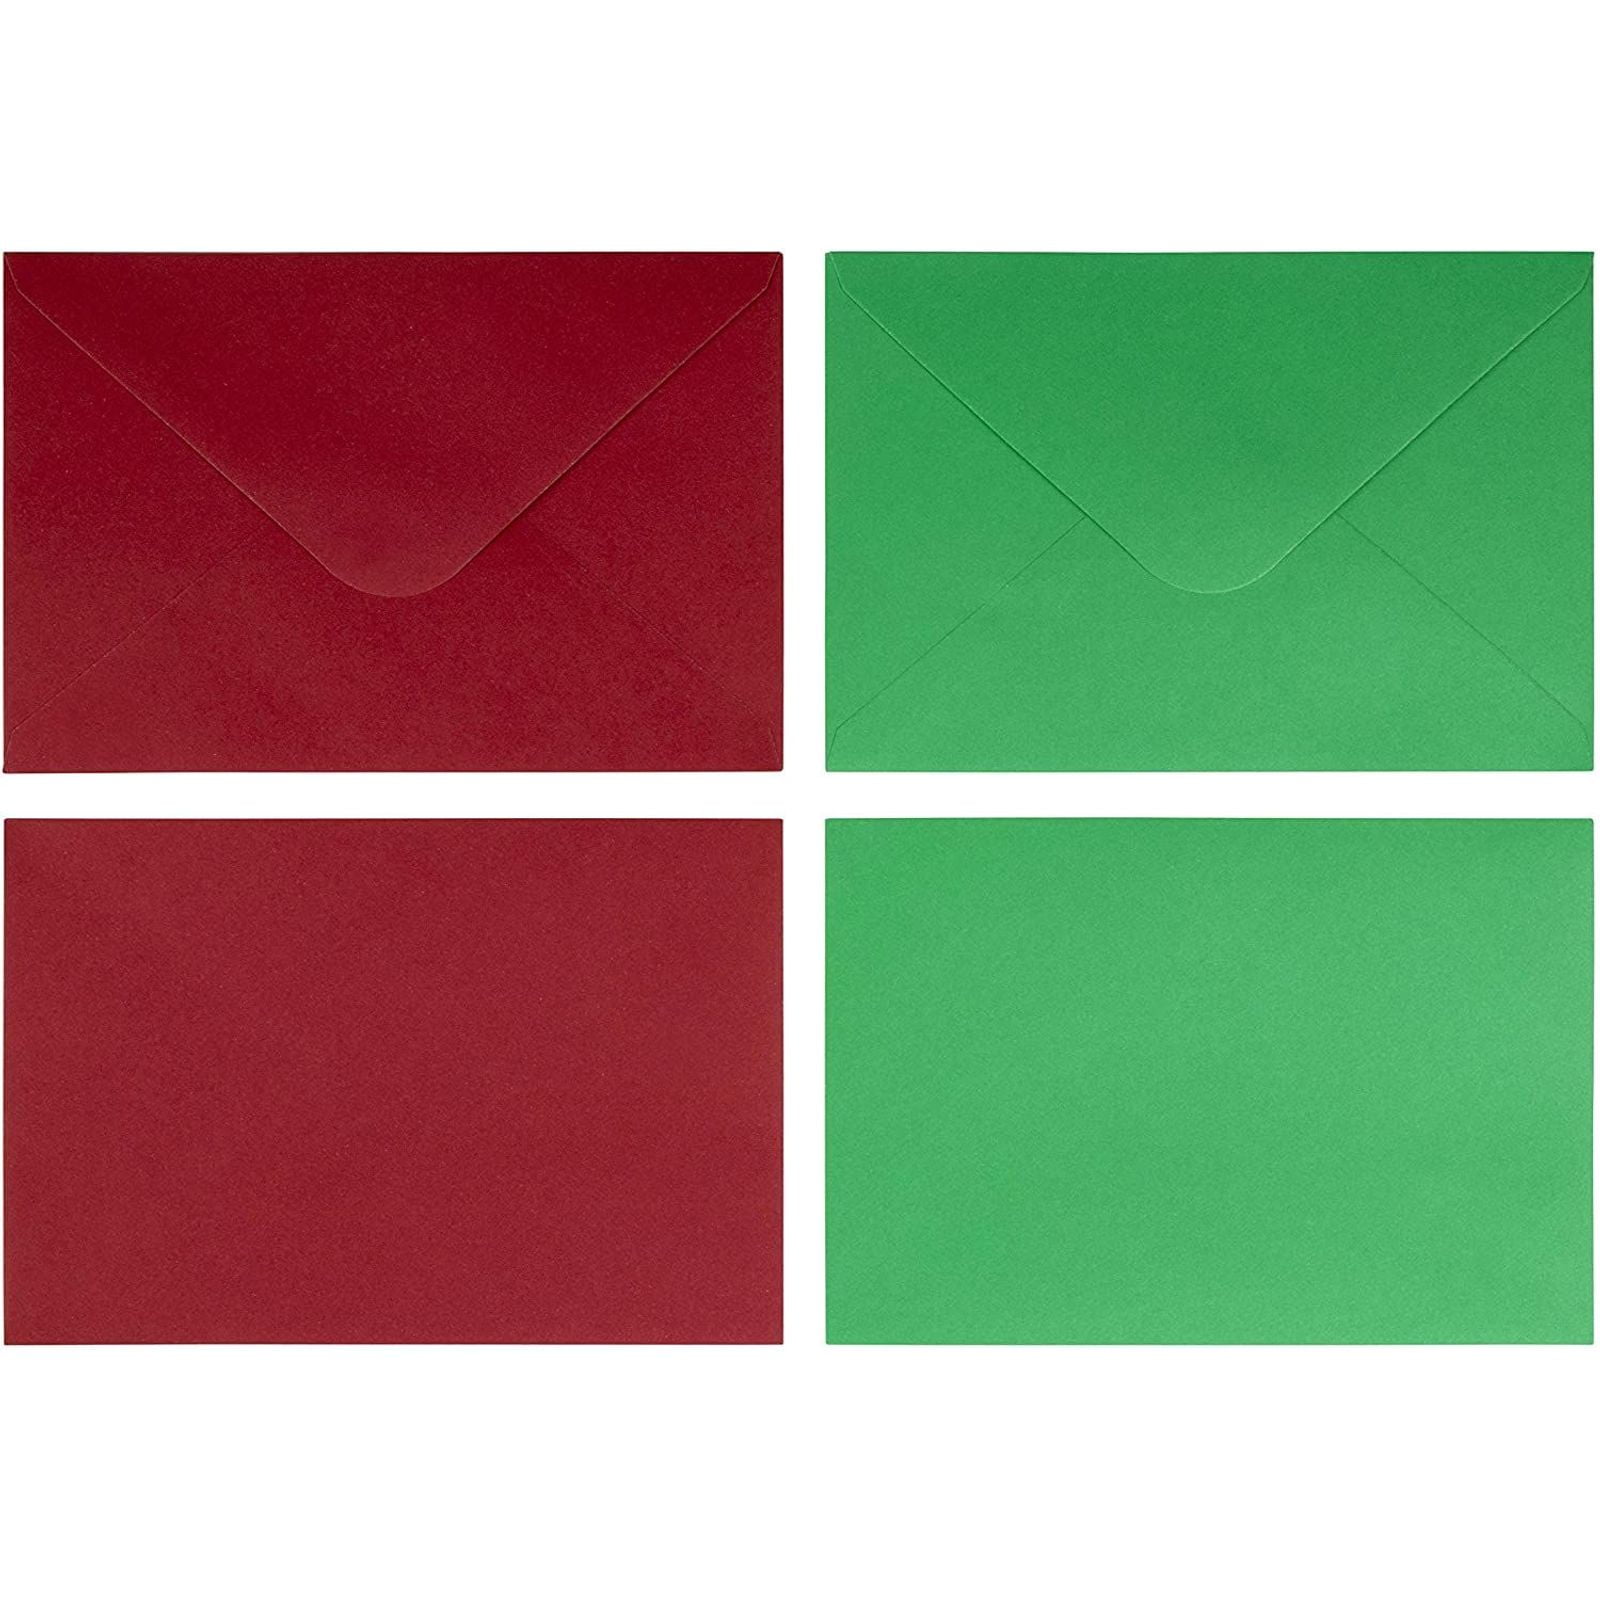 Cards and Envelopes, card size 15x15 cm, envelope size 16x16 cm, green,  red, 50sets - Packlinq